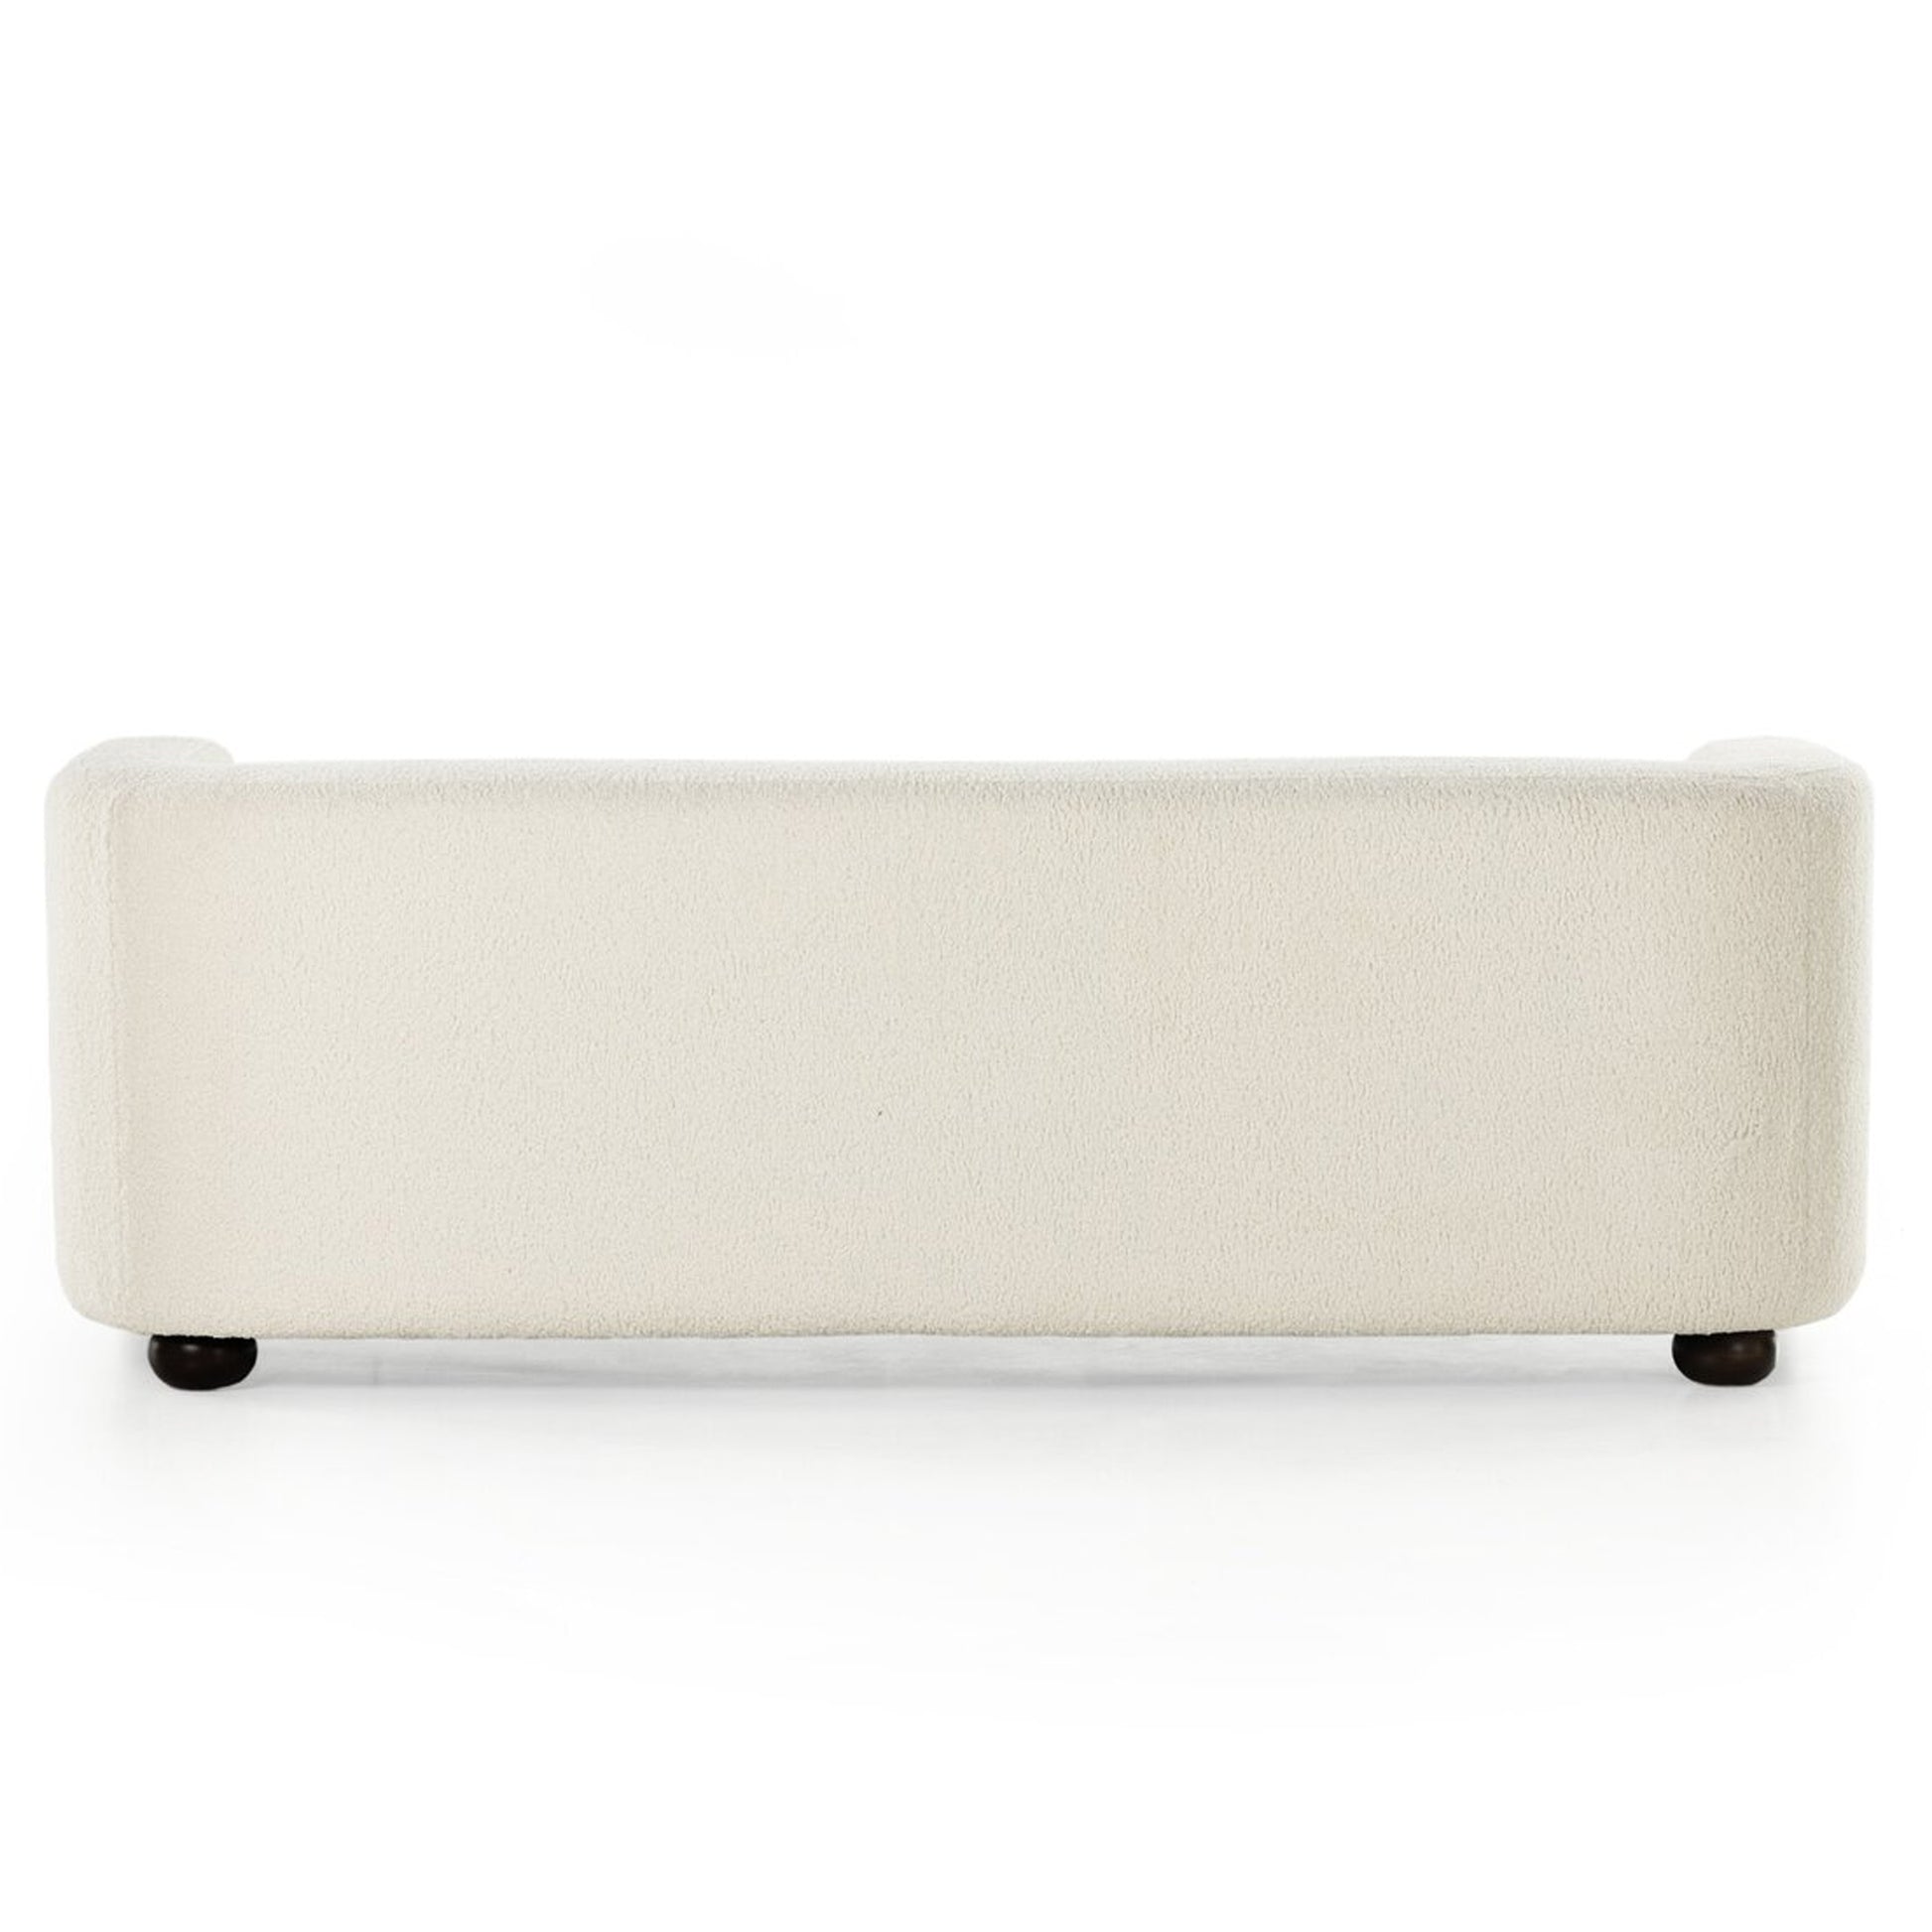 Vic Upholstered Sofa in Natural White – 3 Seater - IONS DESIGN